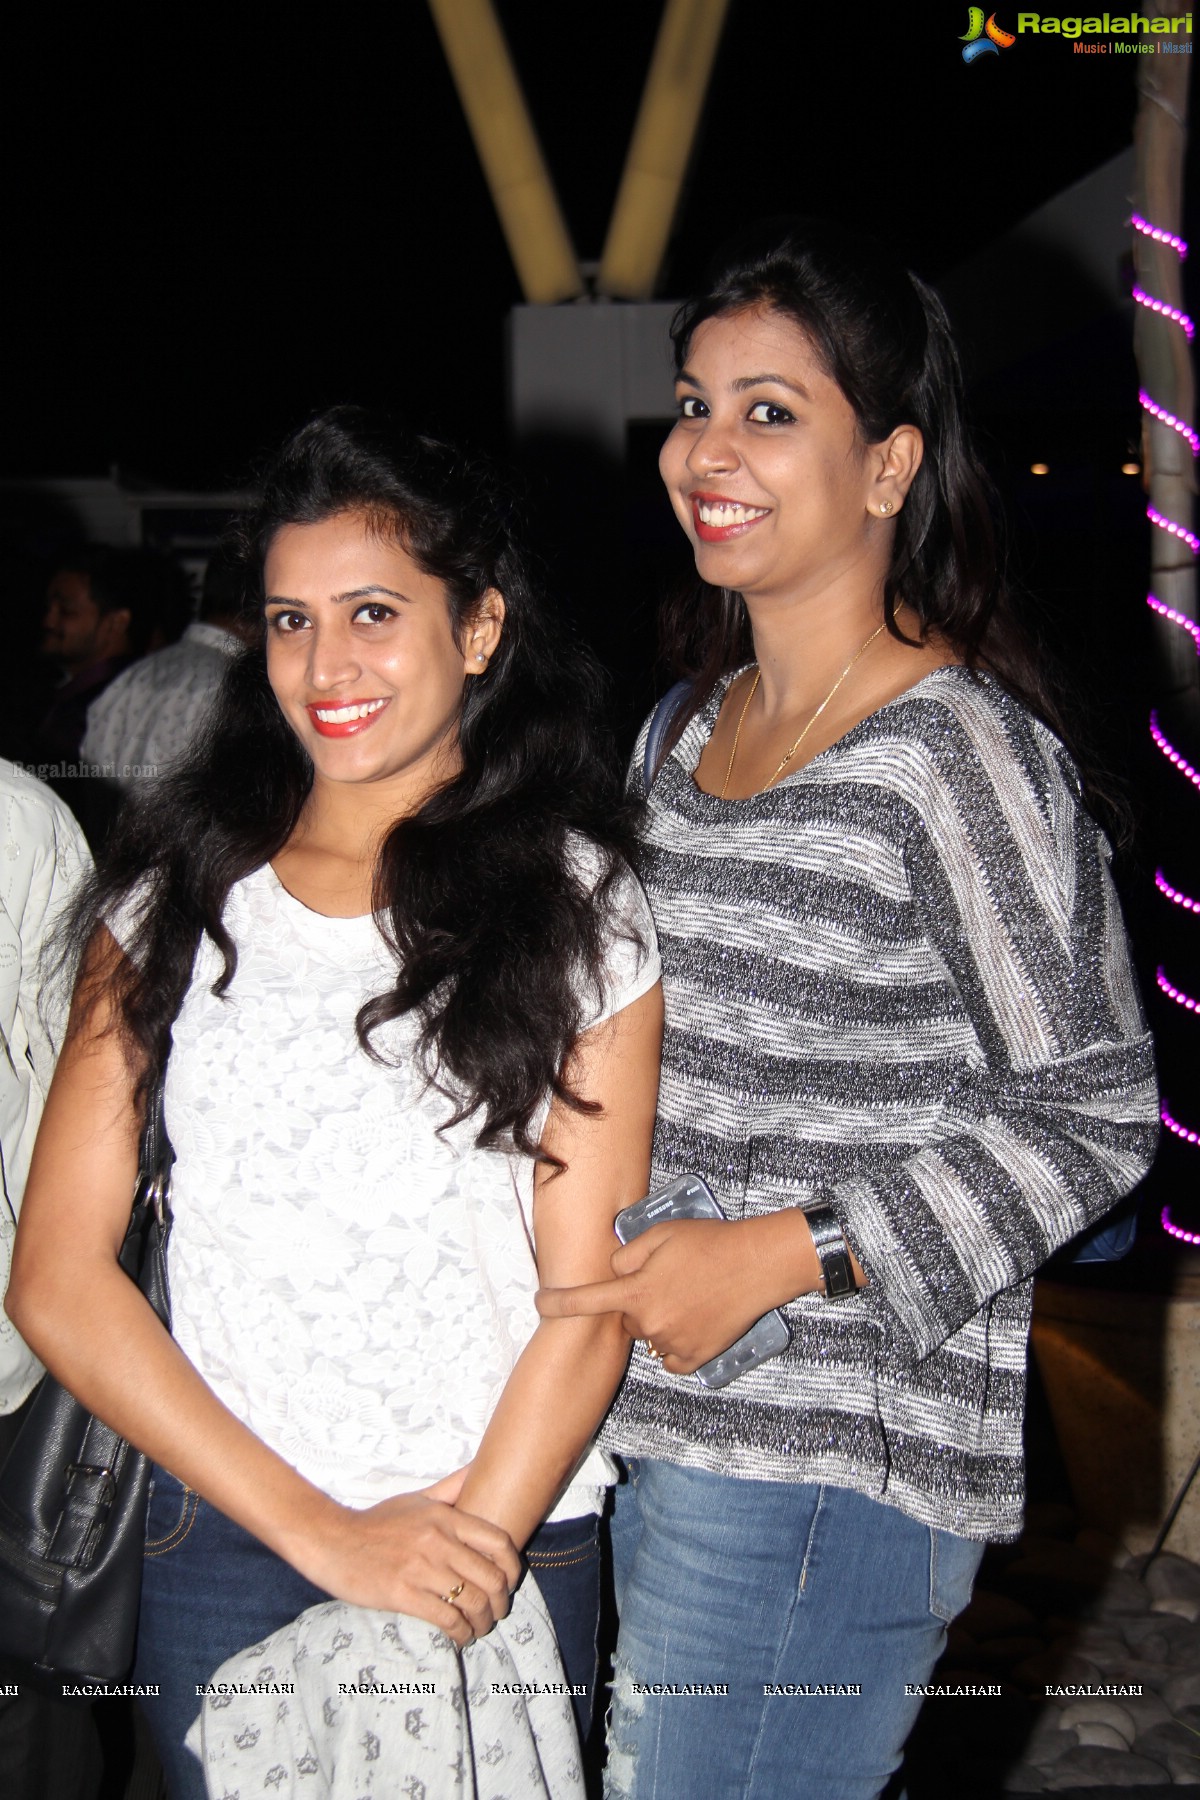 The Launch Party at Vertigo, Hyderabad - Event by Purple Events